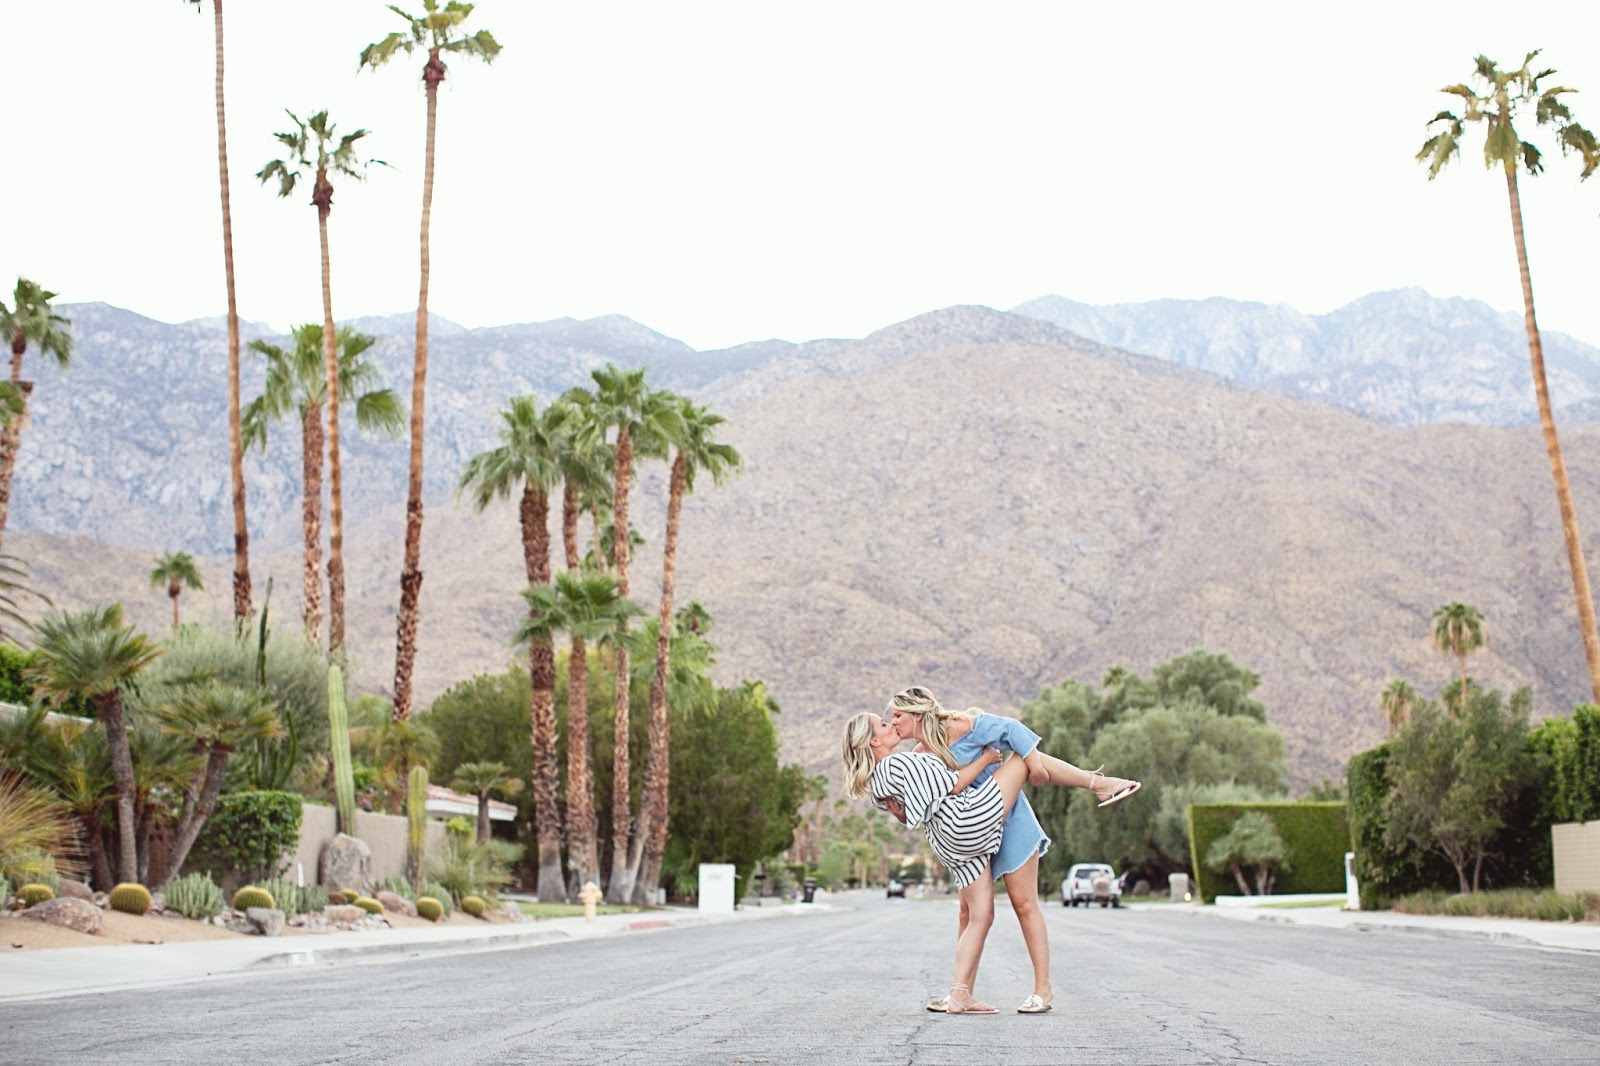 So we present to you, our engagement photoshoot in Palm Springs on 21 Septe...